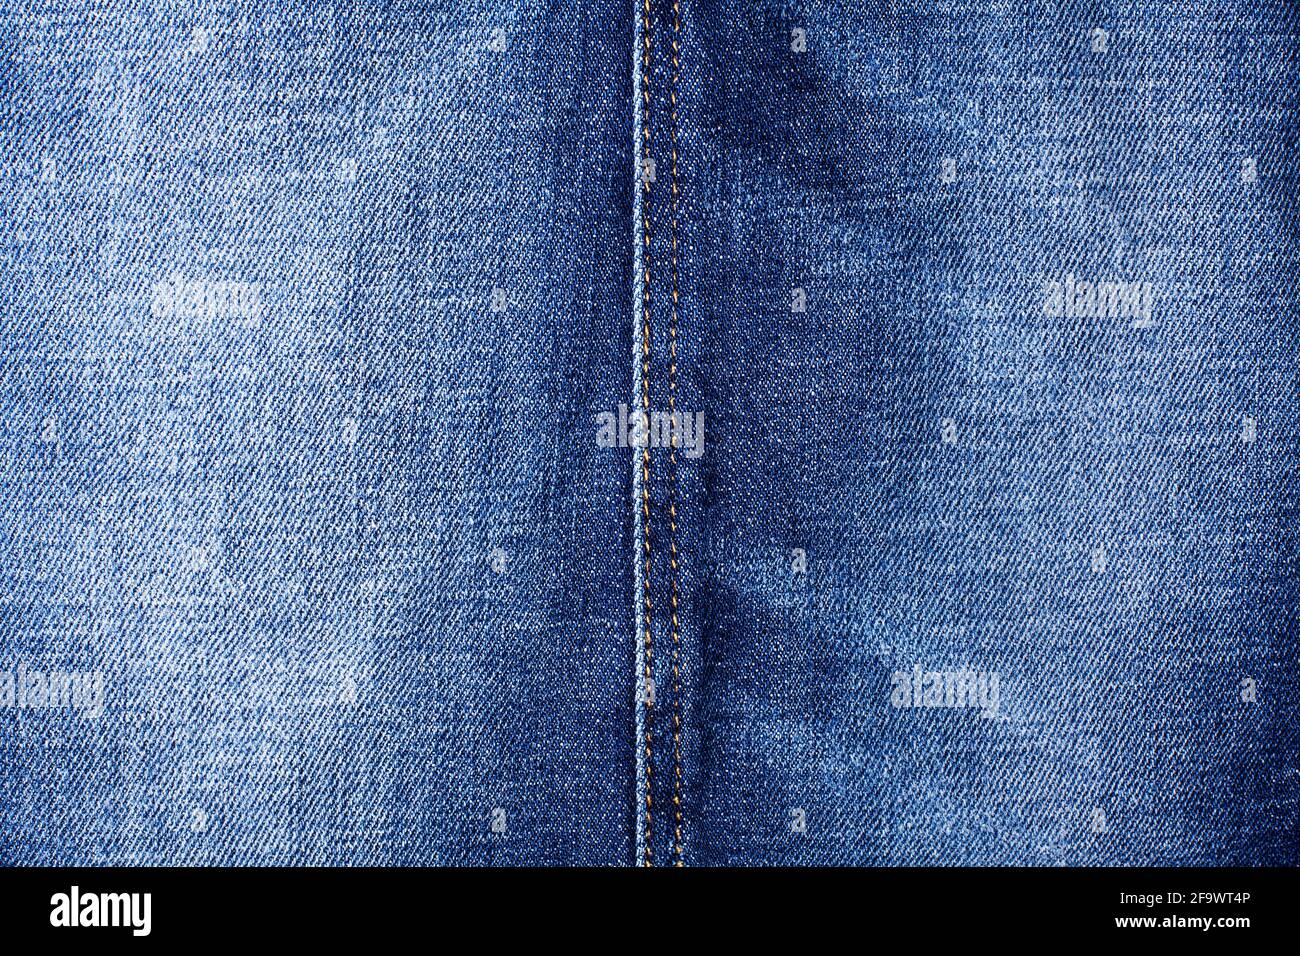 Blue jeans texture and seam close up, thread stitch line, jean textile background, blue denim backdrop, faded jeans pattern, shabby indigo jeans cloth Stock Photo